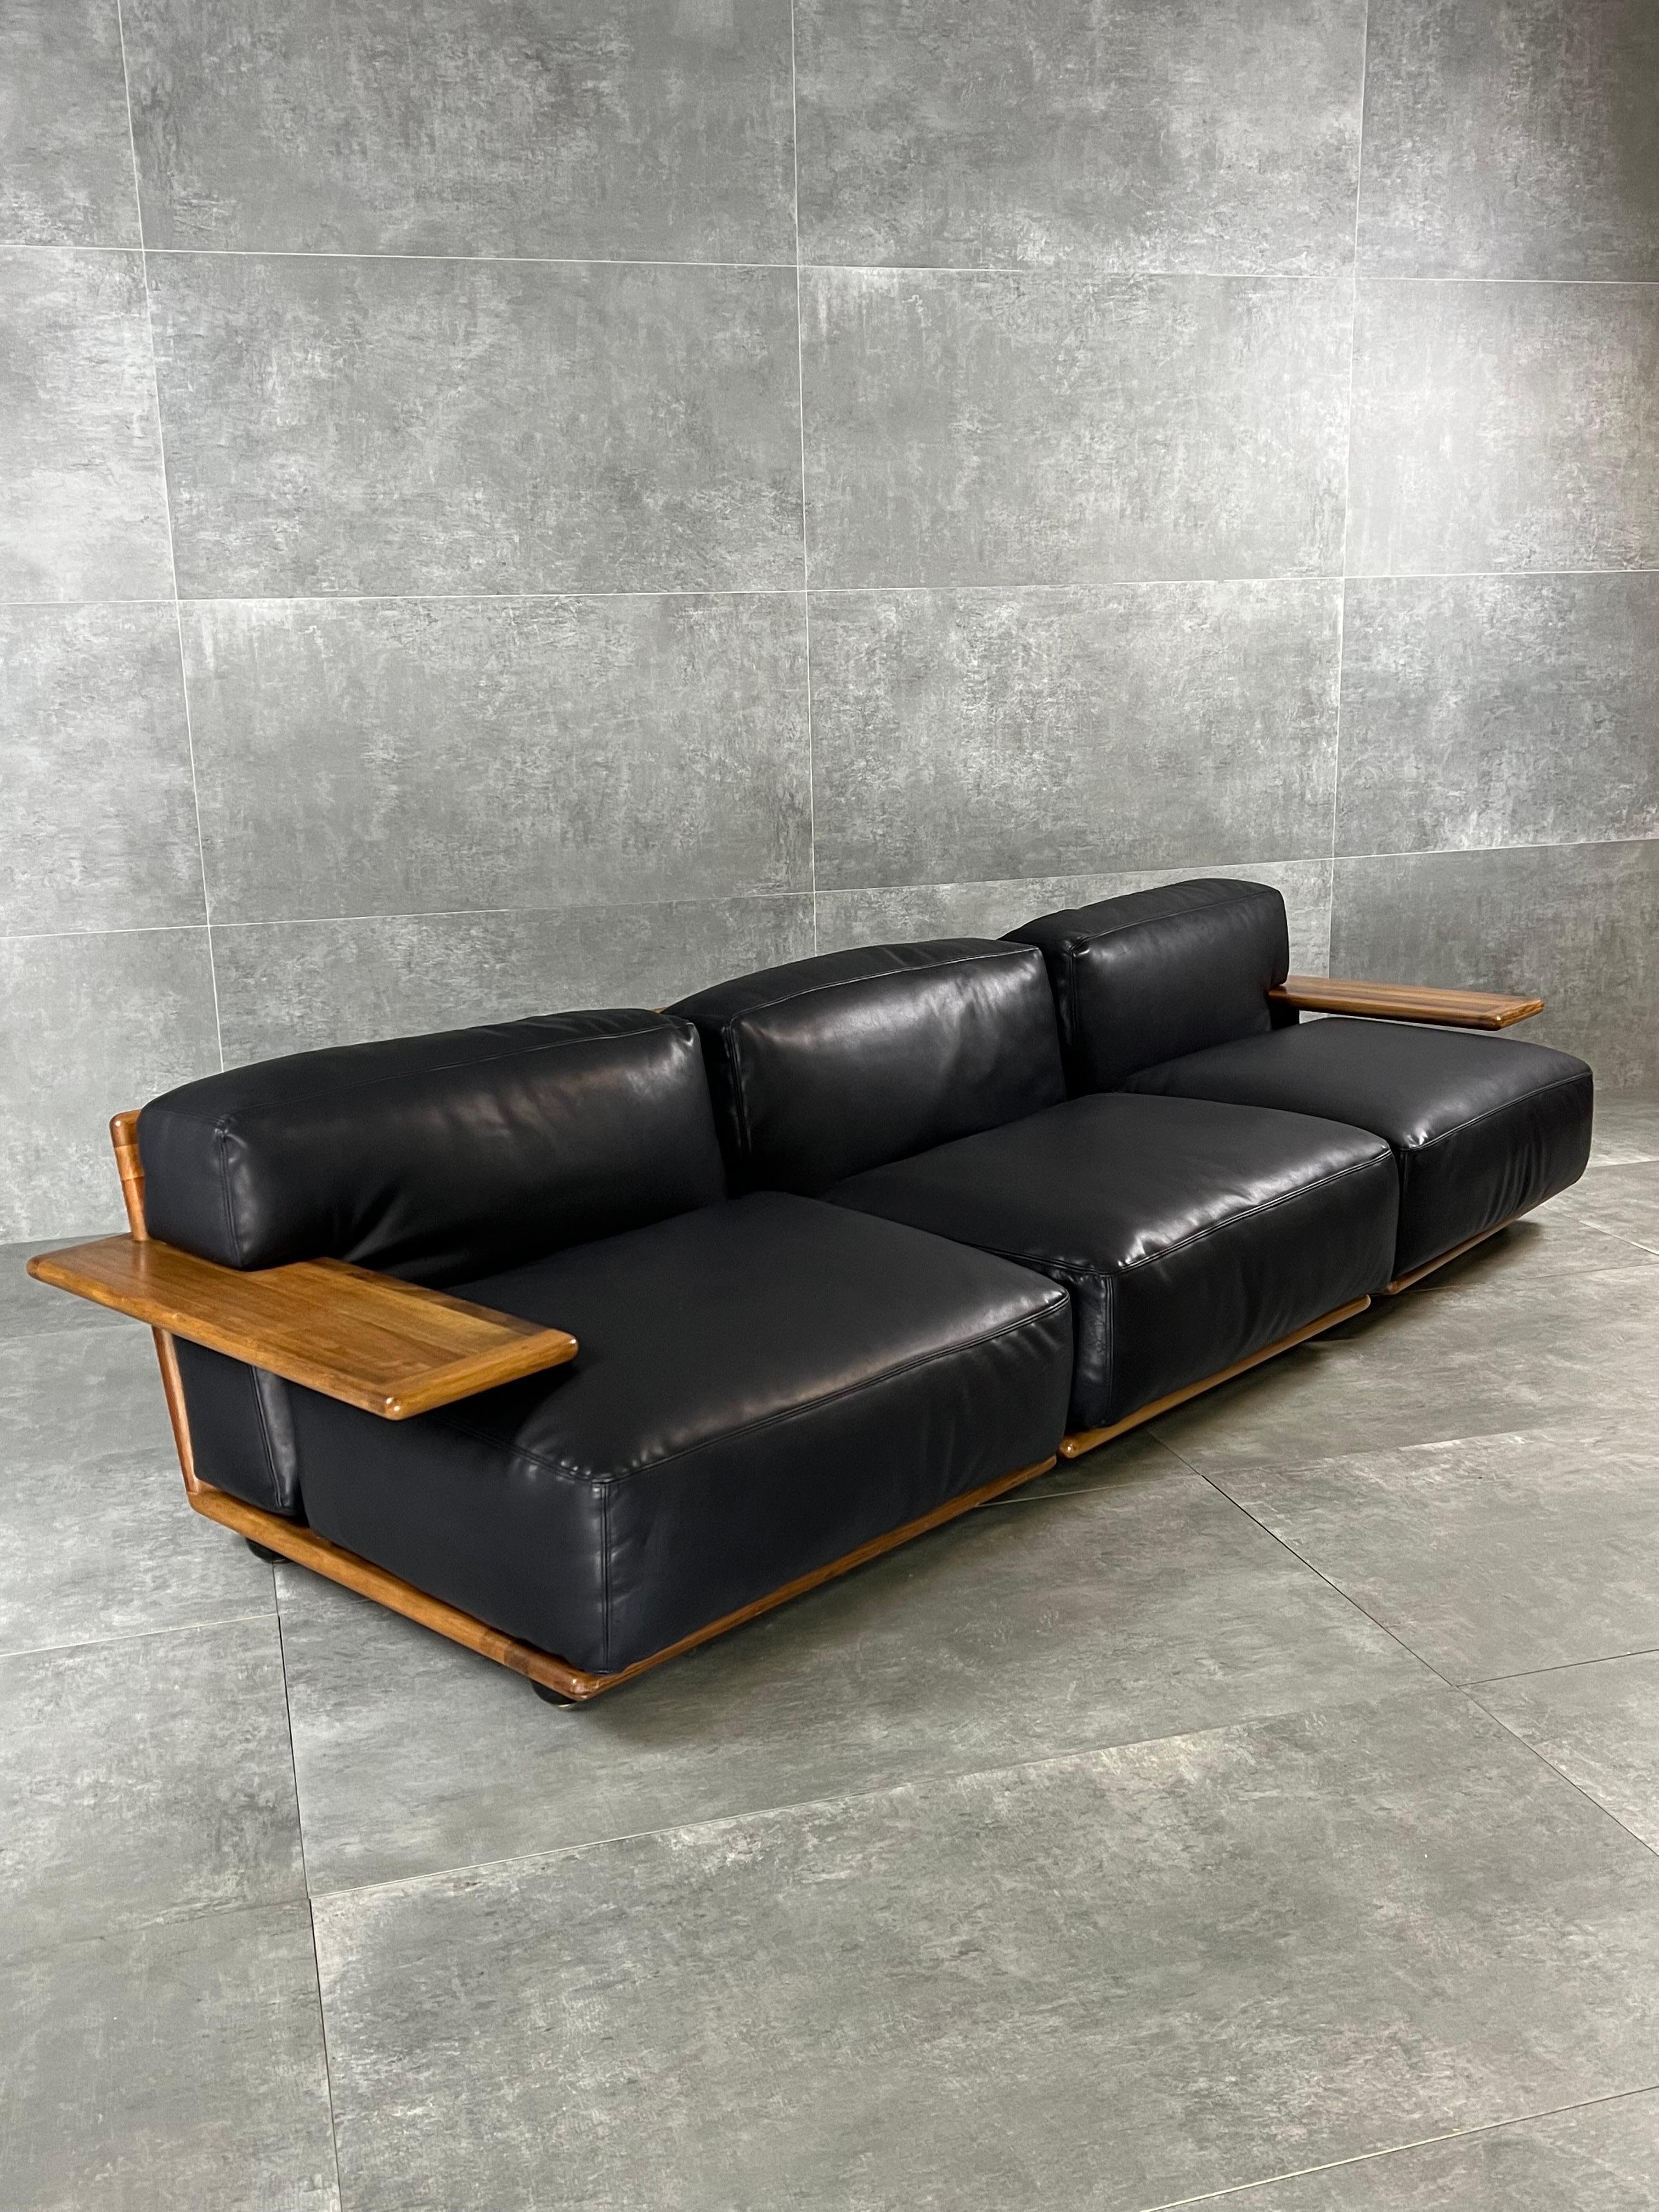 Stunning modular sofa designed by Mario Bellini and manufactured by Cassina in Italy during 1970s. It features a wooden structure with high comfort cushions reupholstered in black leather. Original manufacturing label on the bottom. It shows few